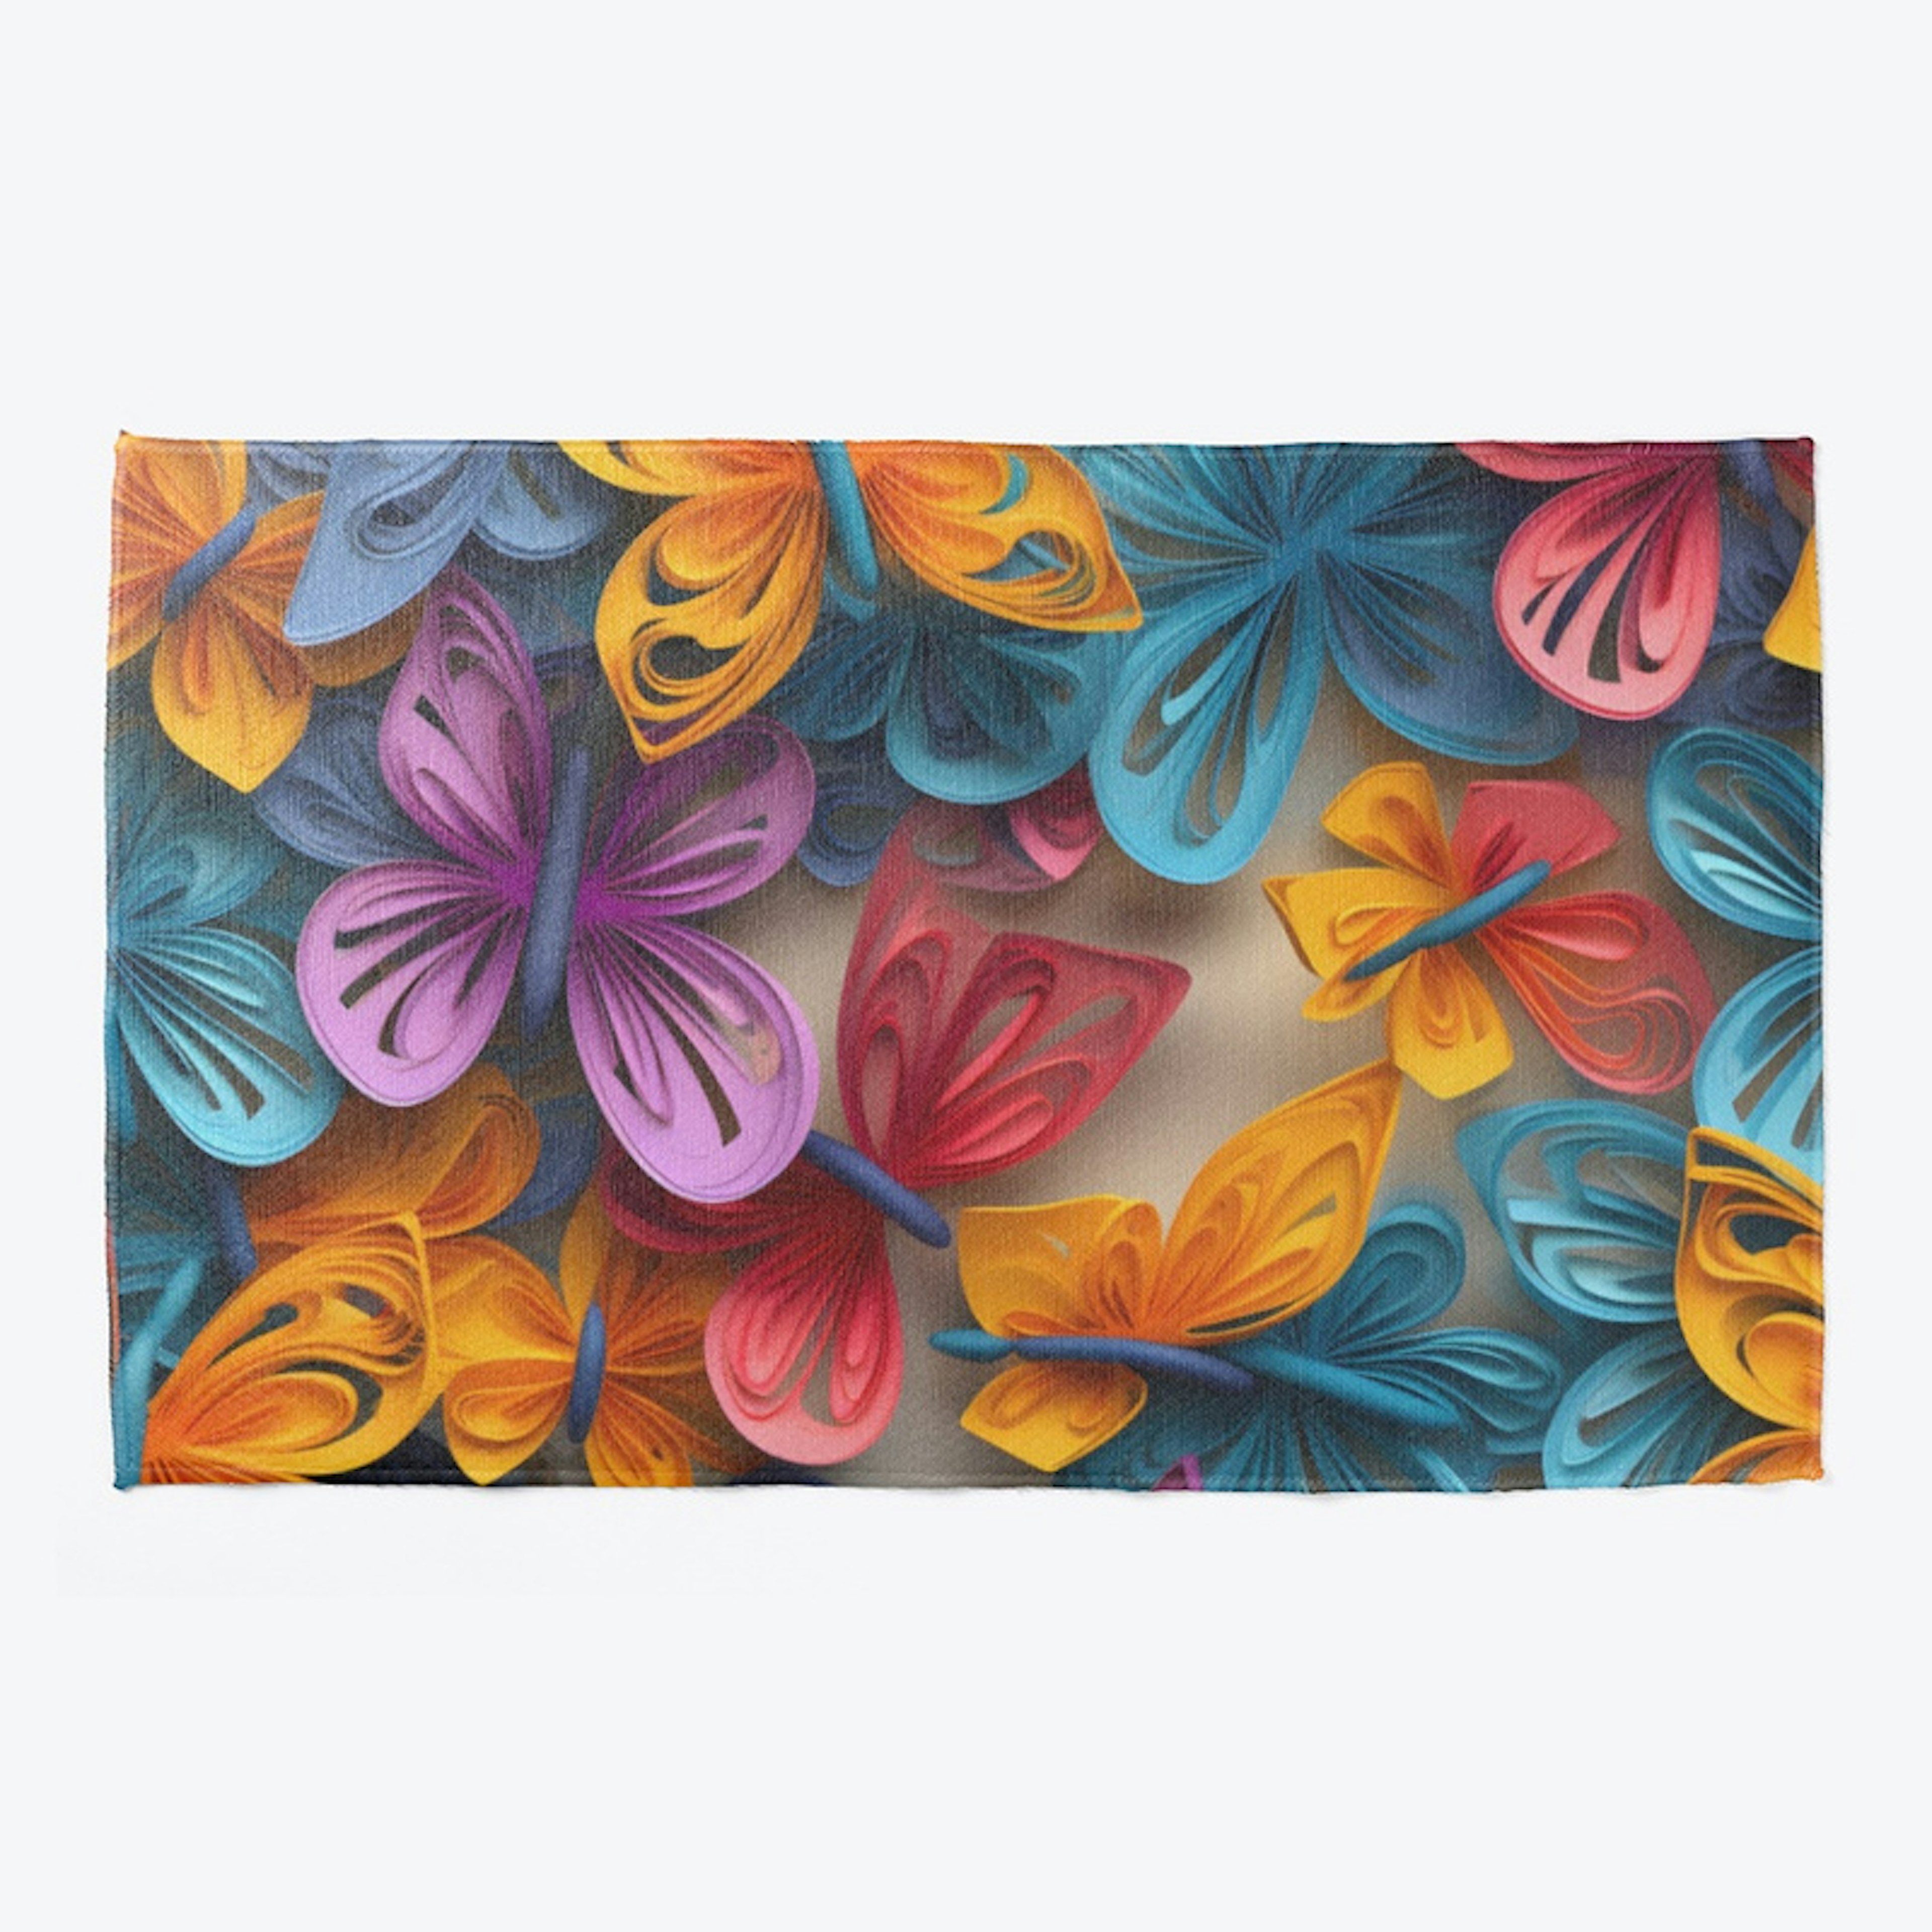 Colorful 3D Butterfly Paper Art